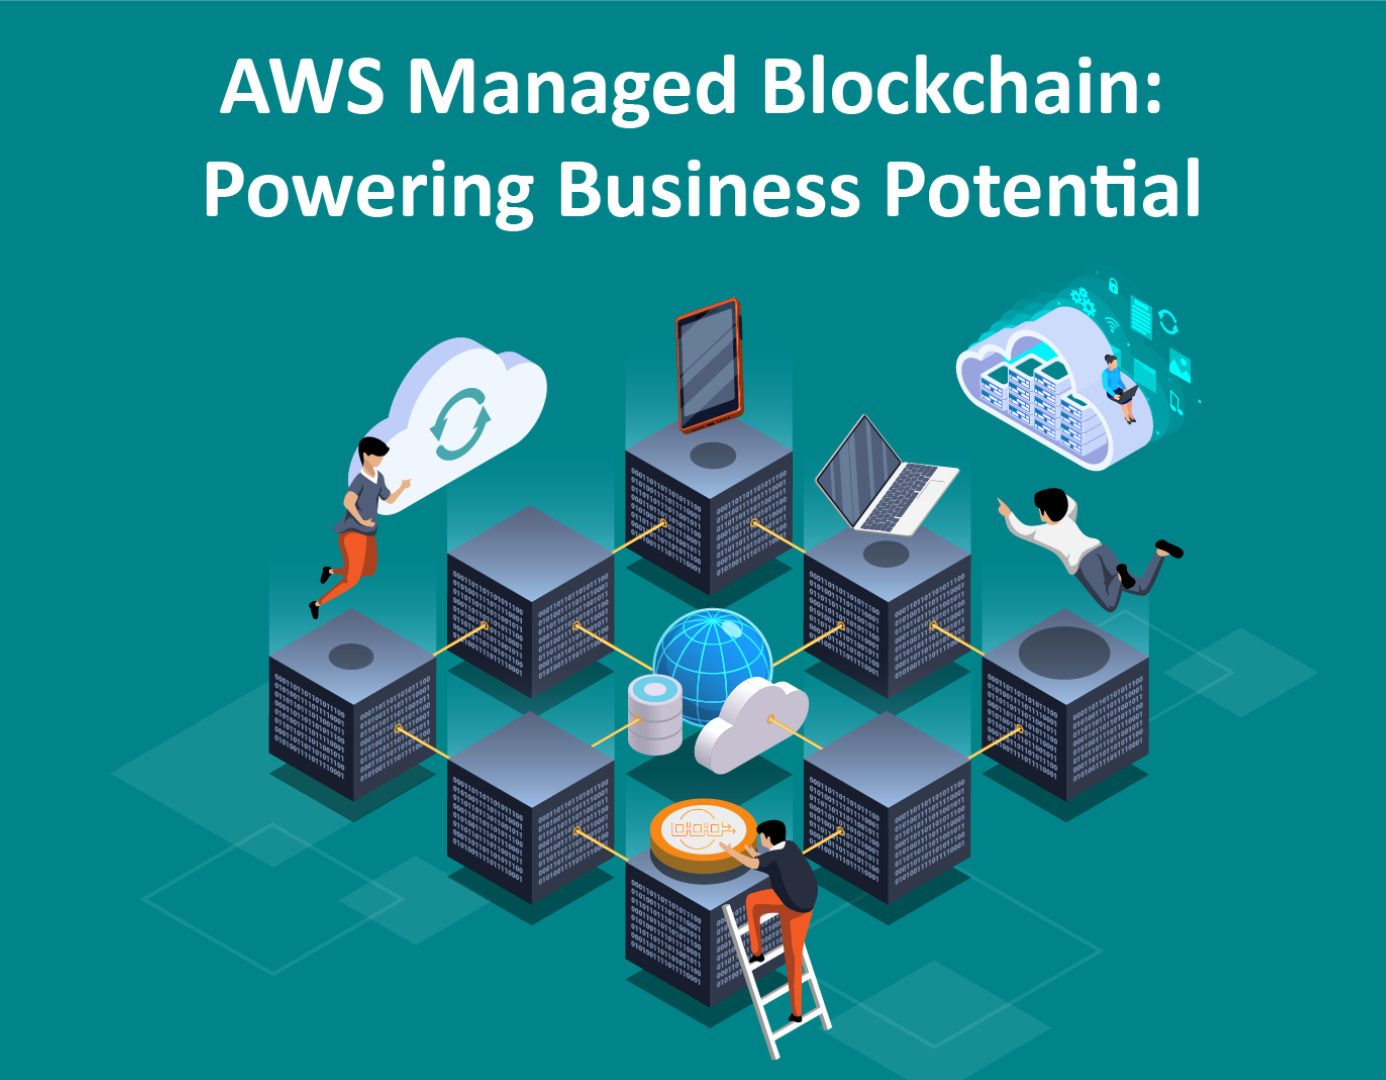 Visual representation of the 'AWS Managed Blockchain: Powering Business Potential' blog post